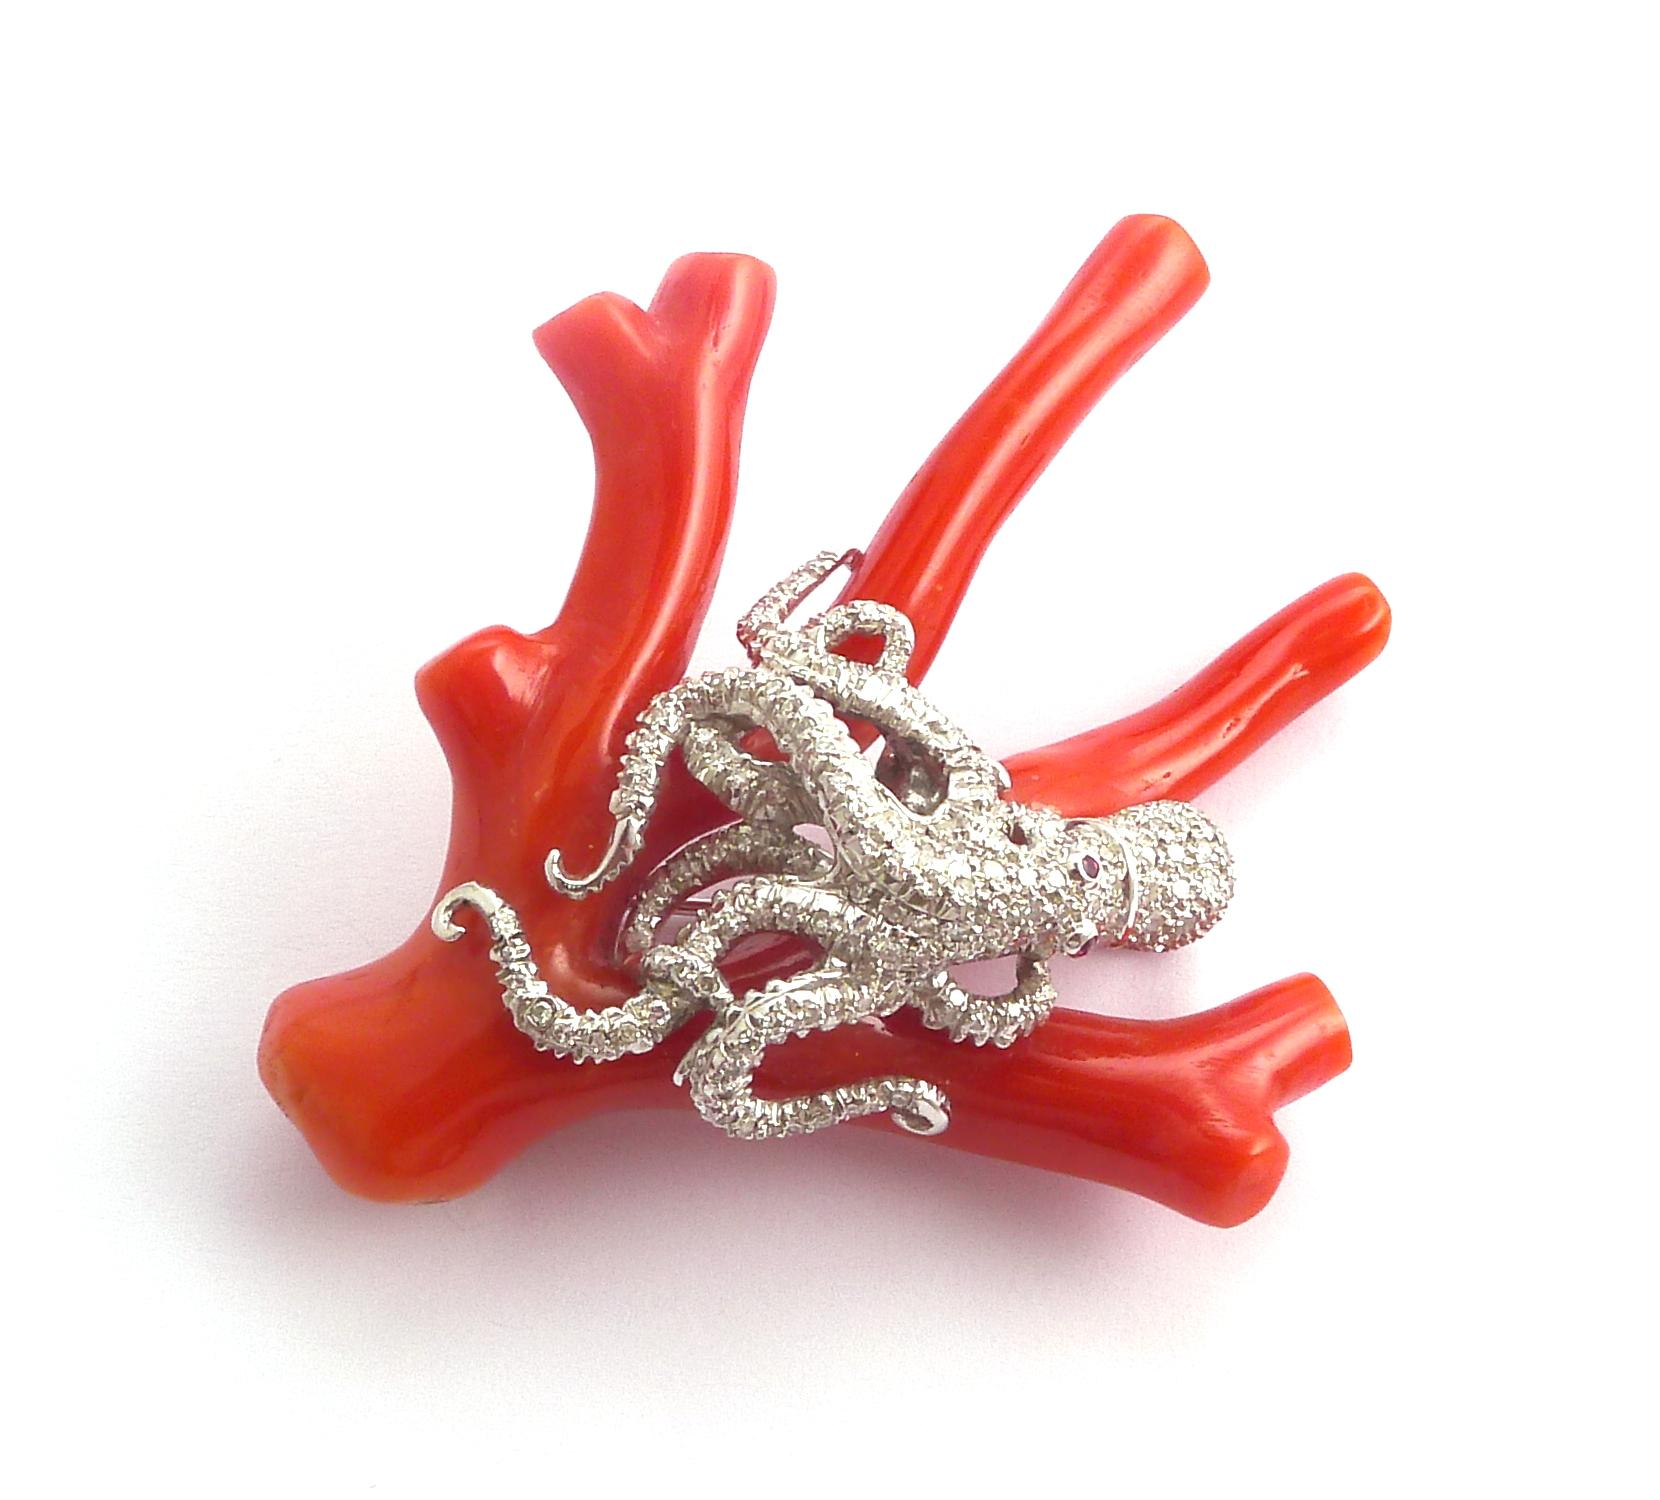 The pavé-set diamond octopus with ruby eyes, on a carved red coral branch

Mounted in platinum
